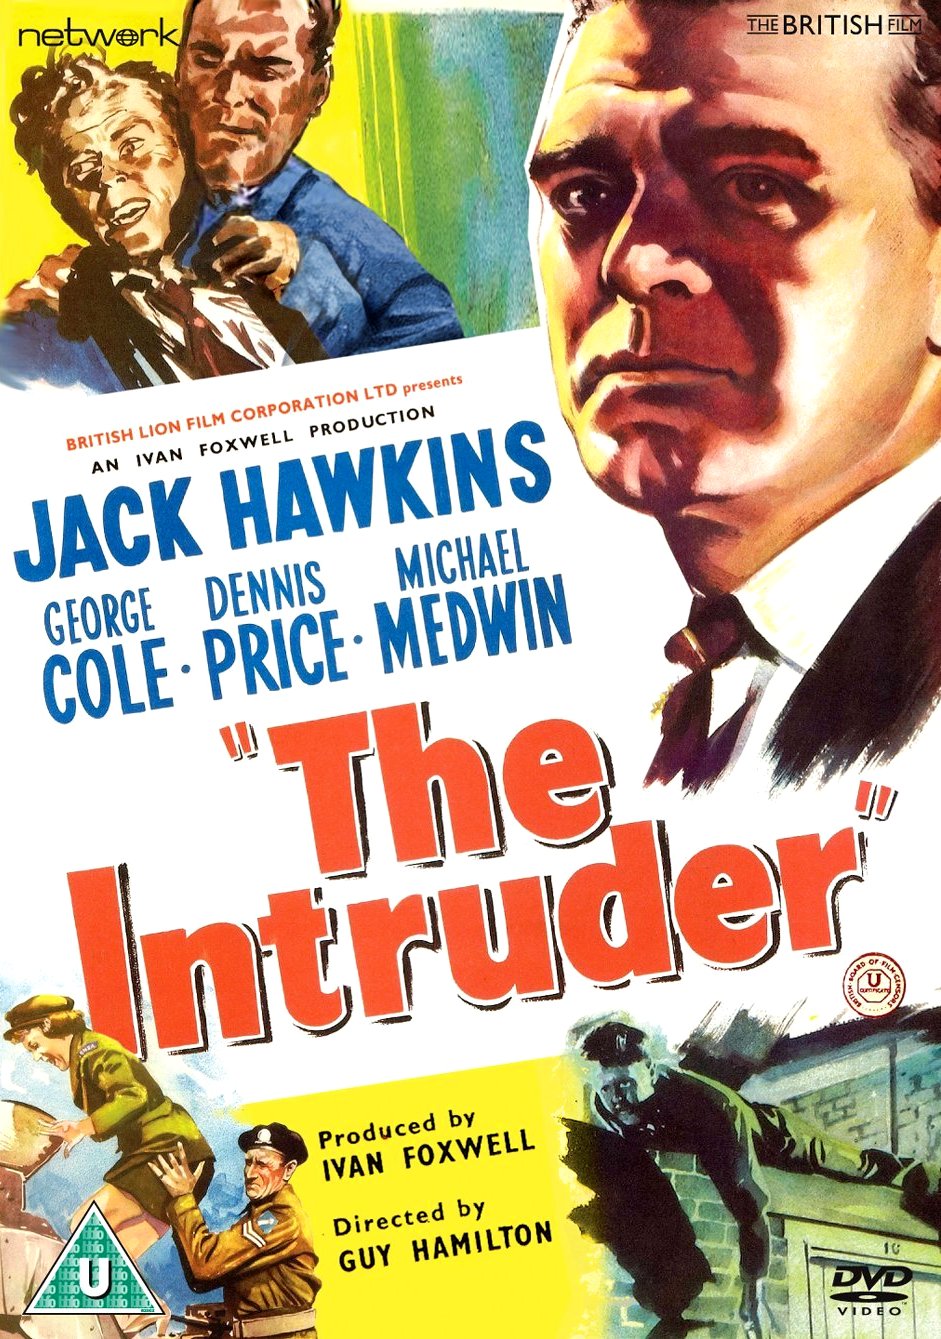 Intruder DVD from Network and The British Film.  Features Jack Hawkins.